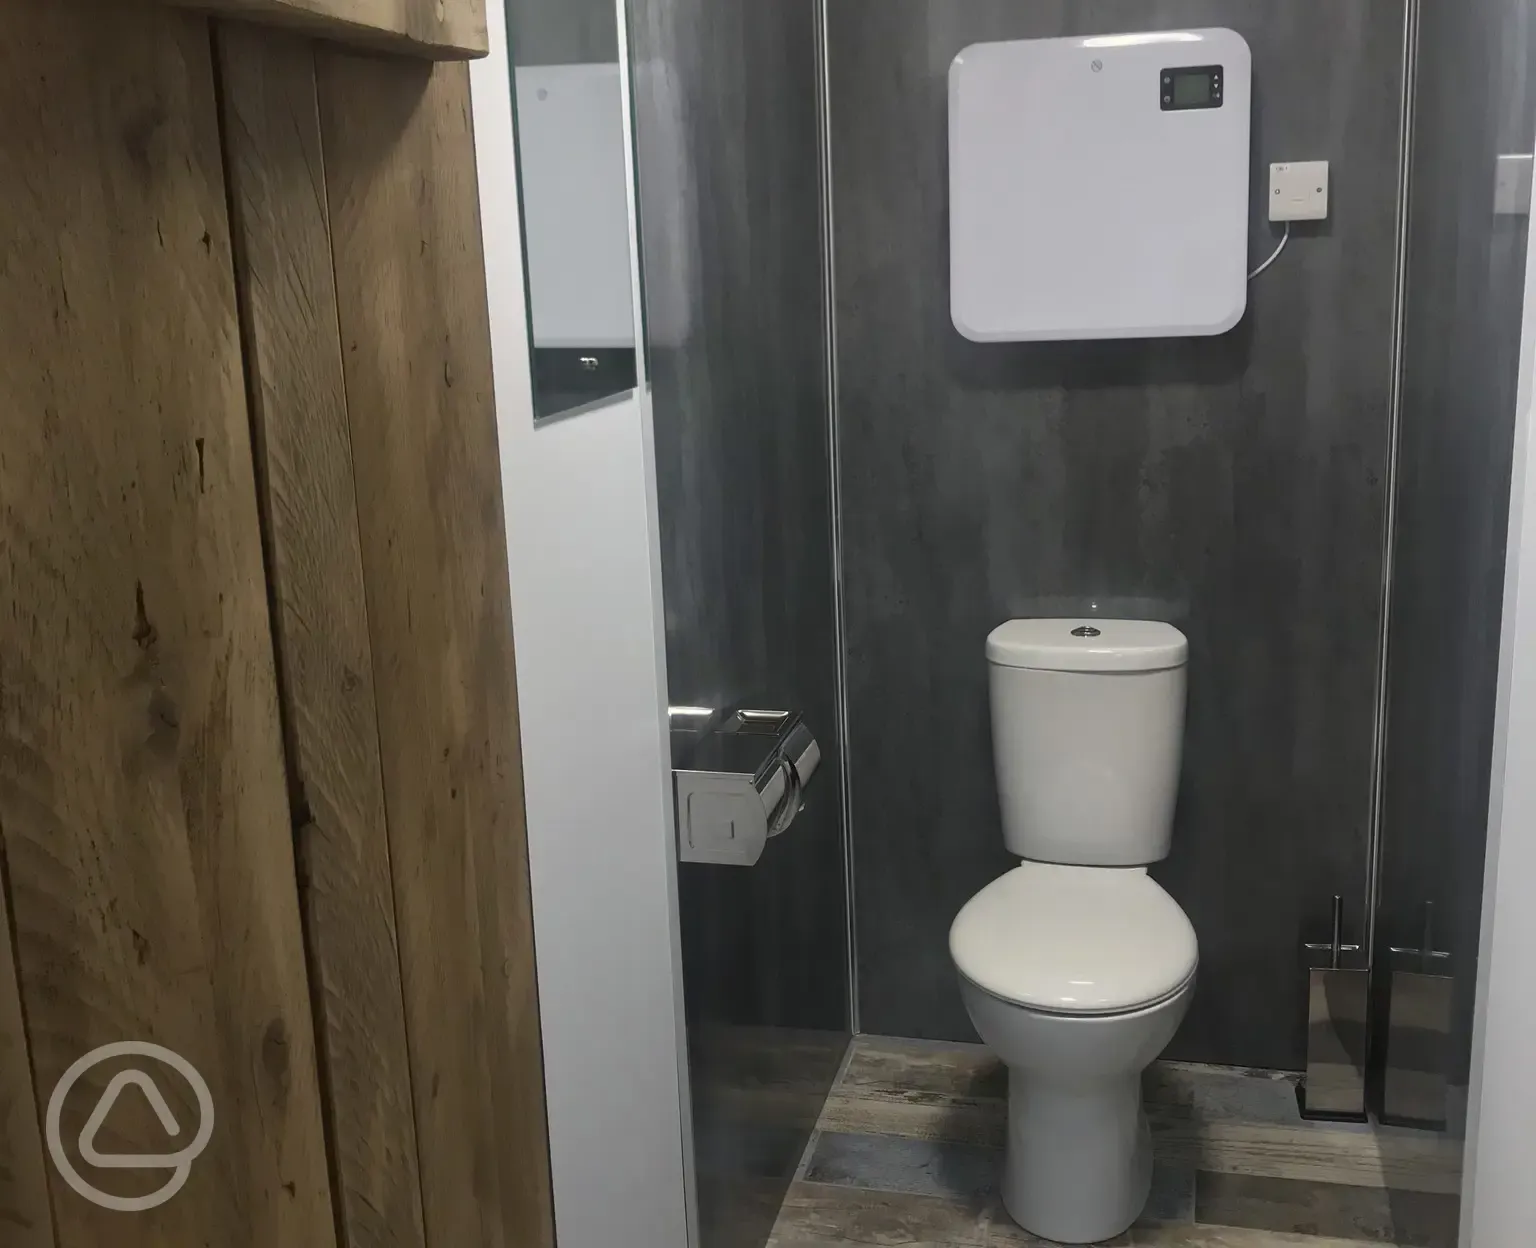 A separate toilet with wall heater.